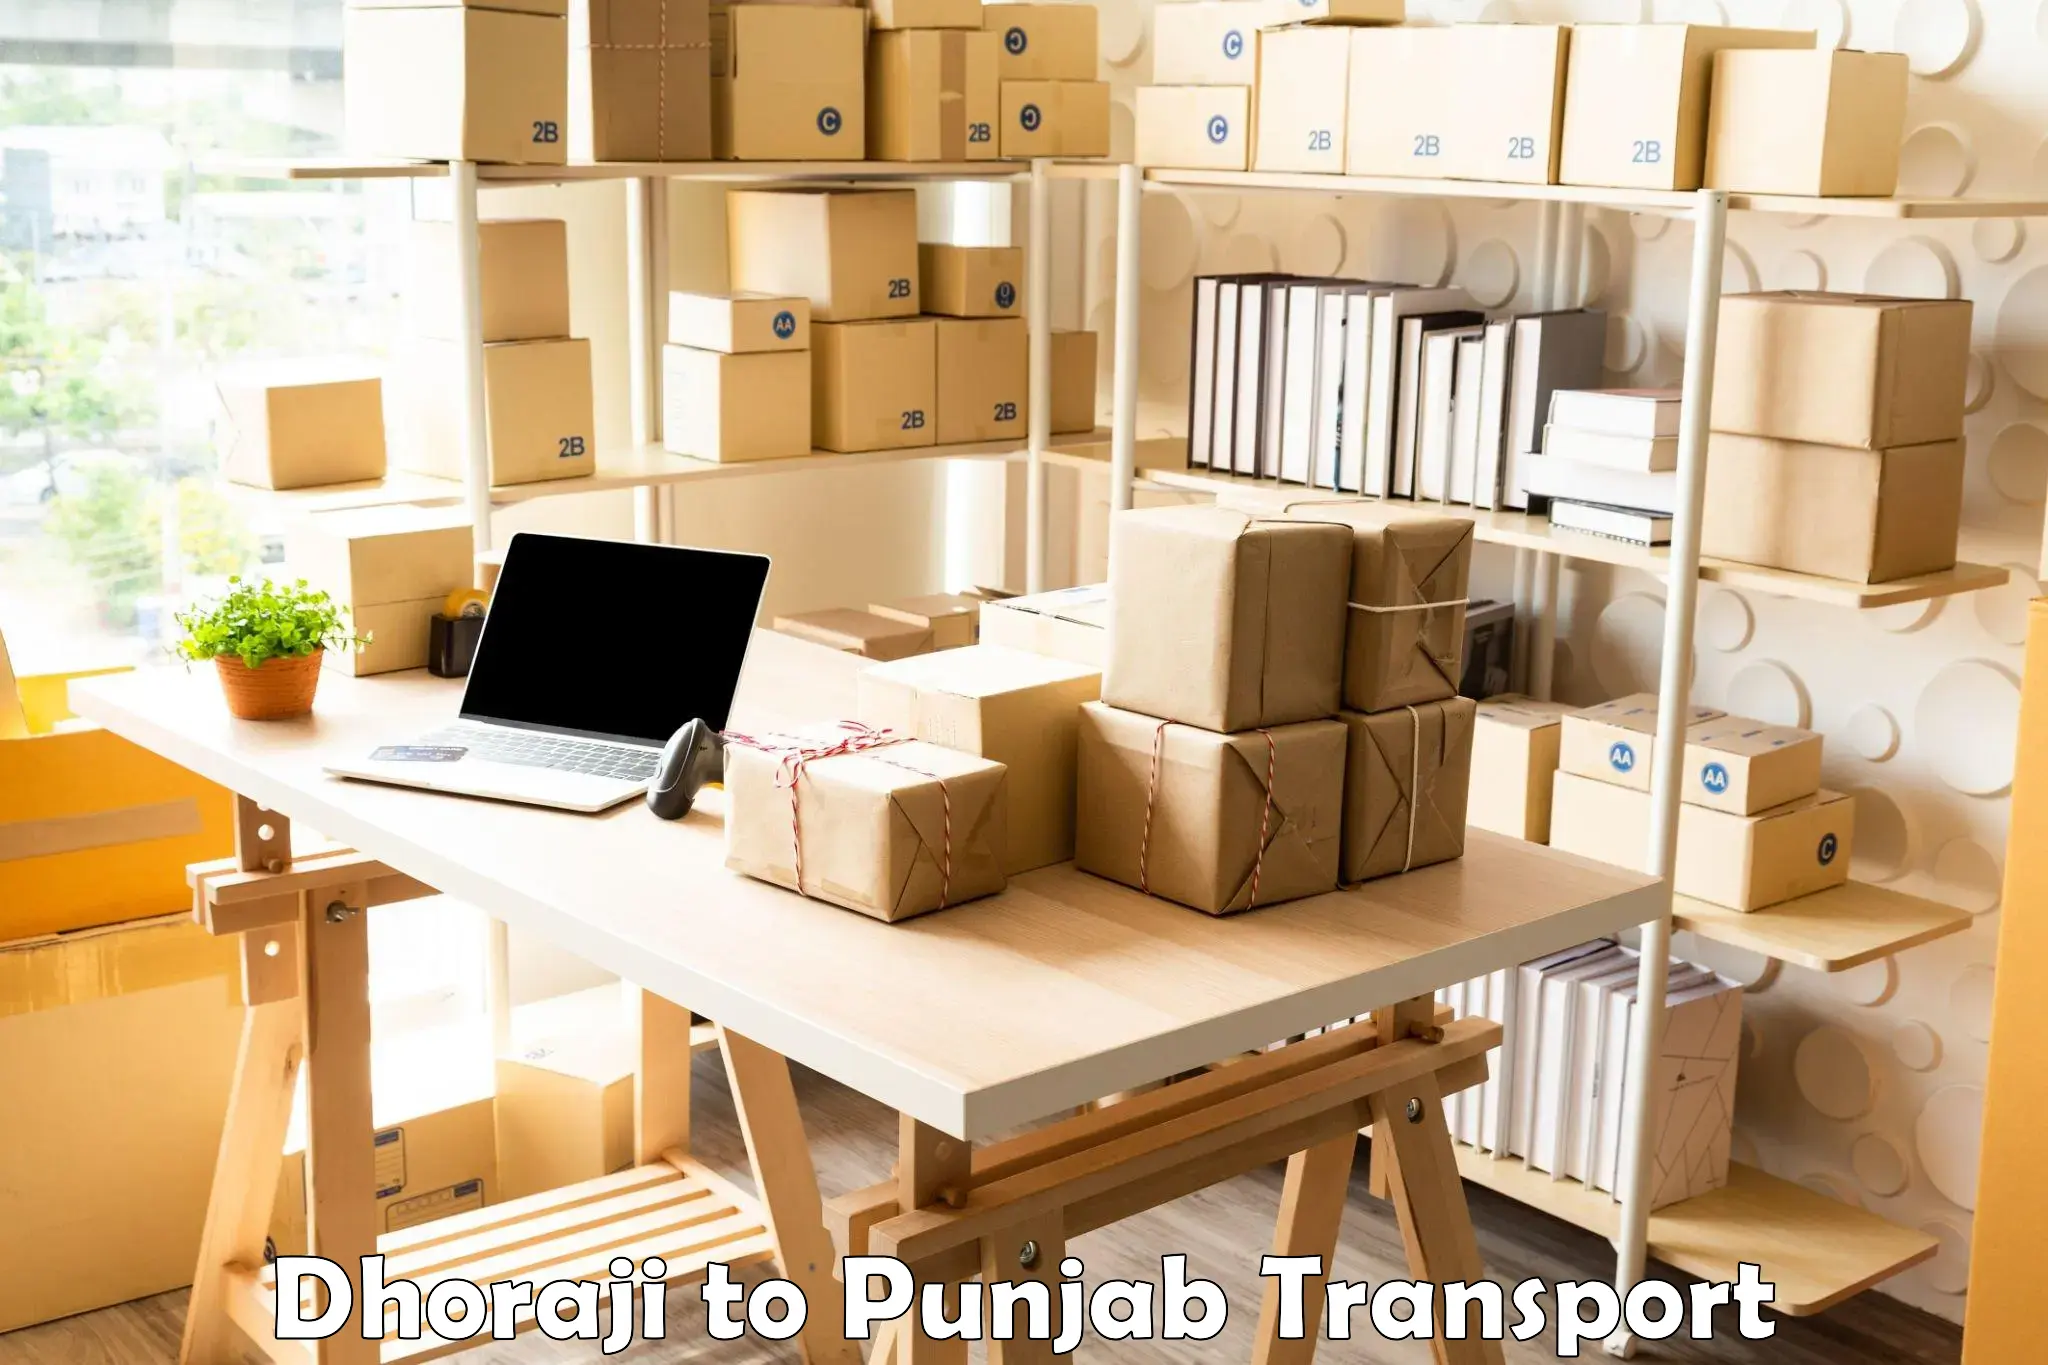 Vehicle transport services in Dhoraji to Firozpur